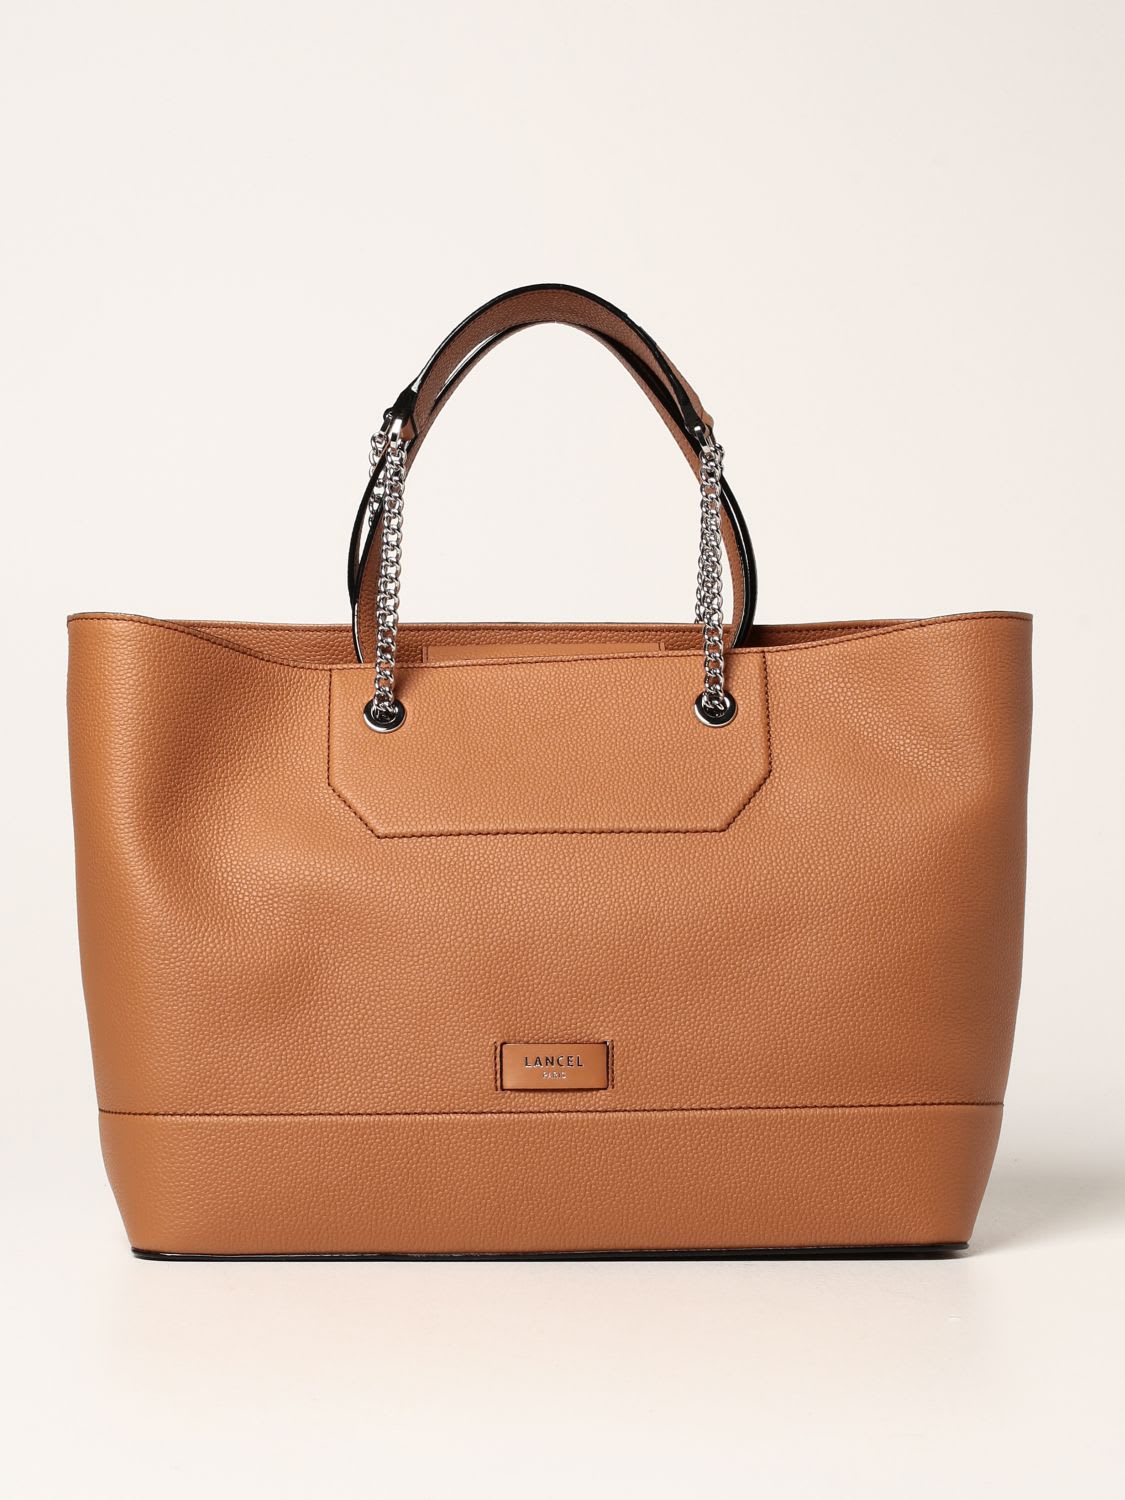 Lancel Tote Bags Ninon Lancel Bag In Grained Leather